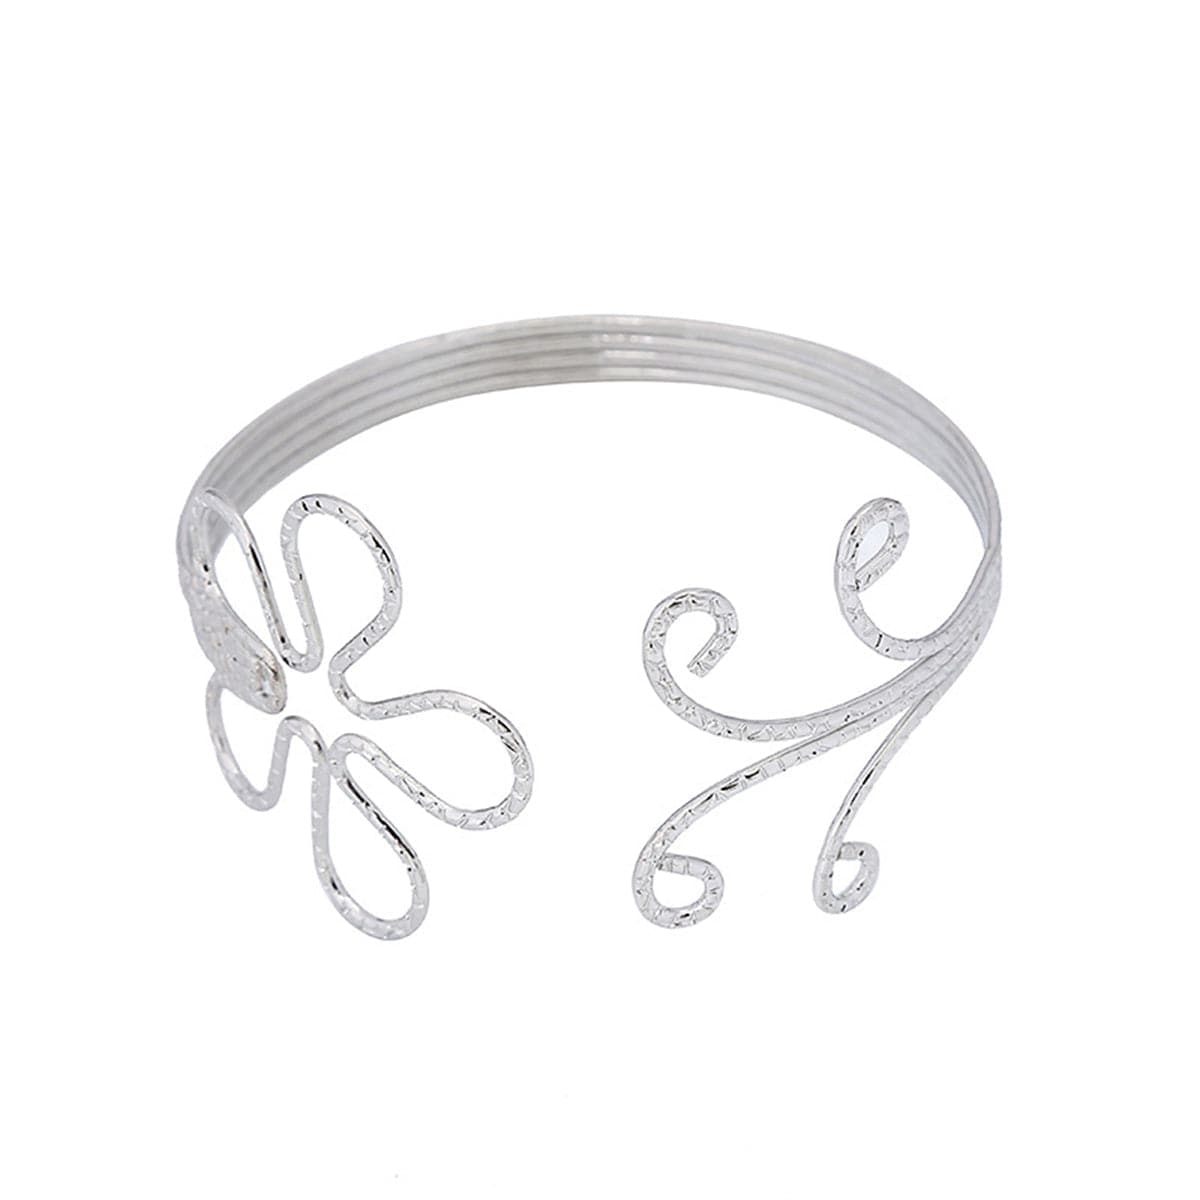 Silver-Plated Open Flower Arm Cuff